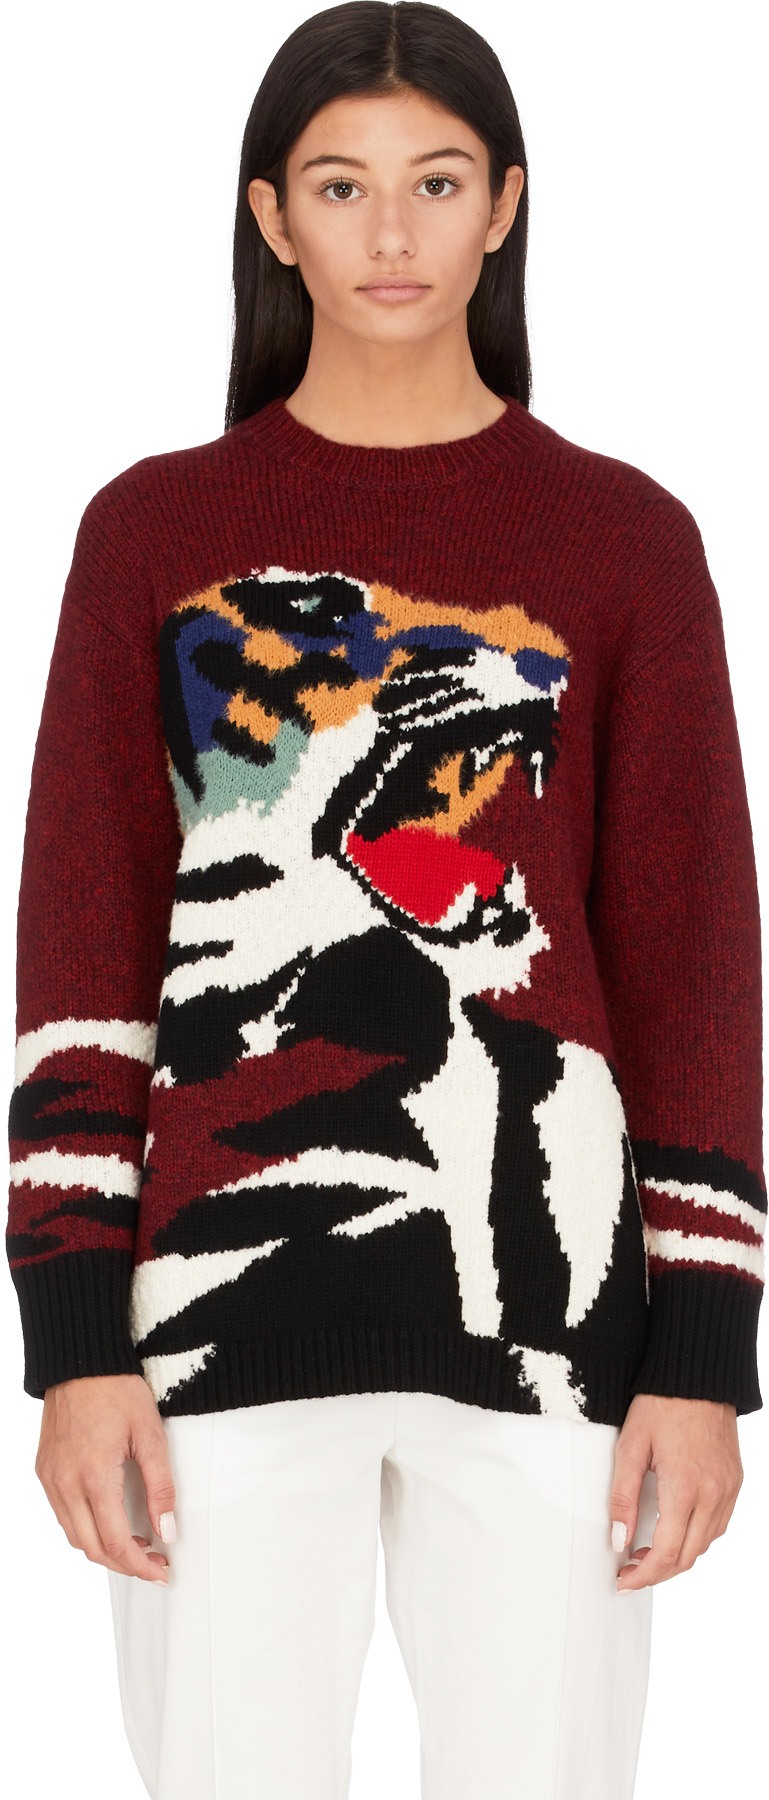 Kenzo: Oversized Tiger Knit Pullover - Bordeaux | influenceu